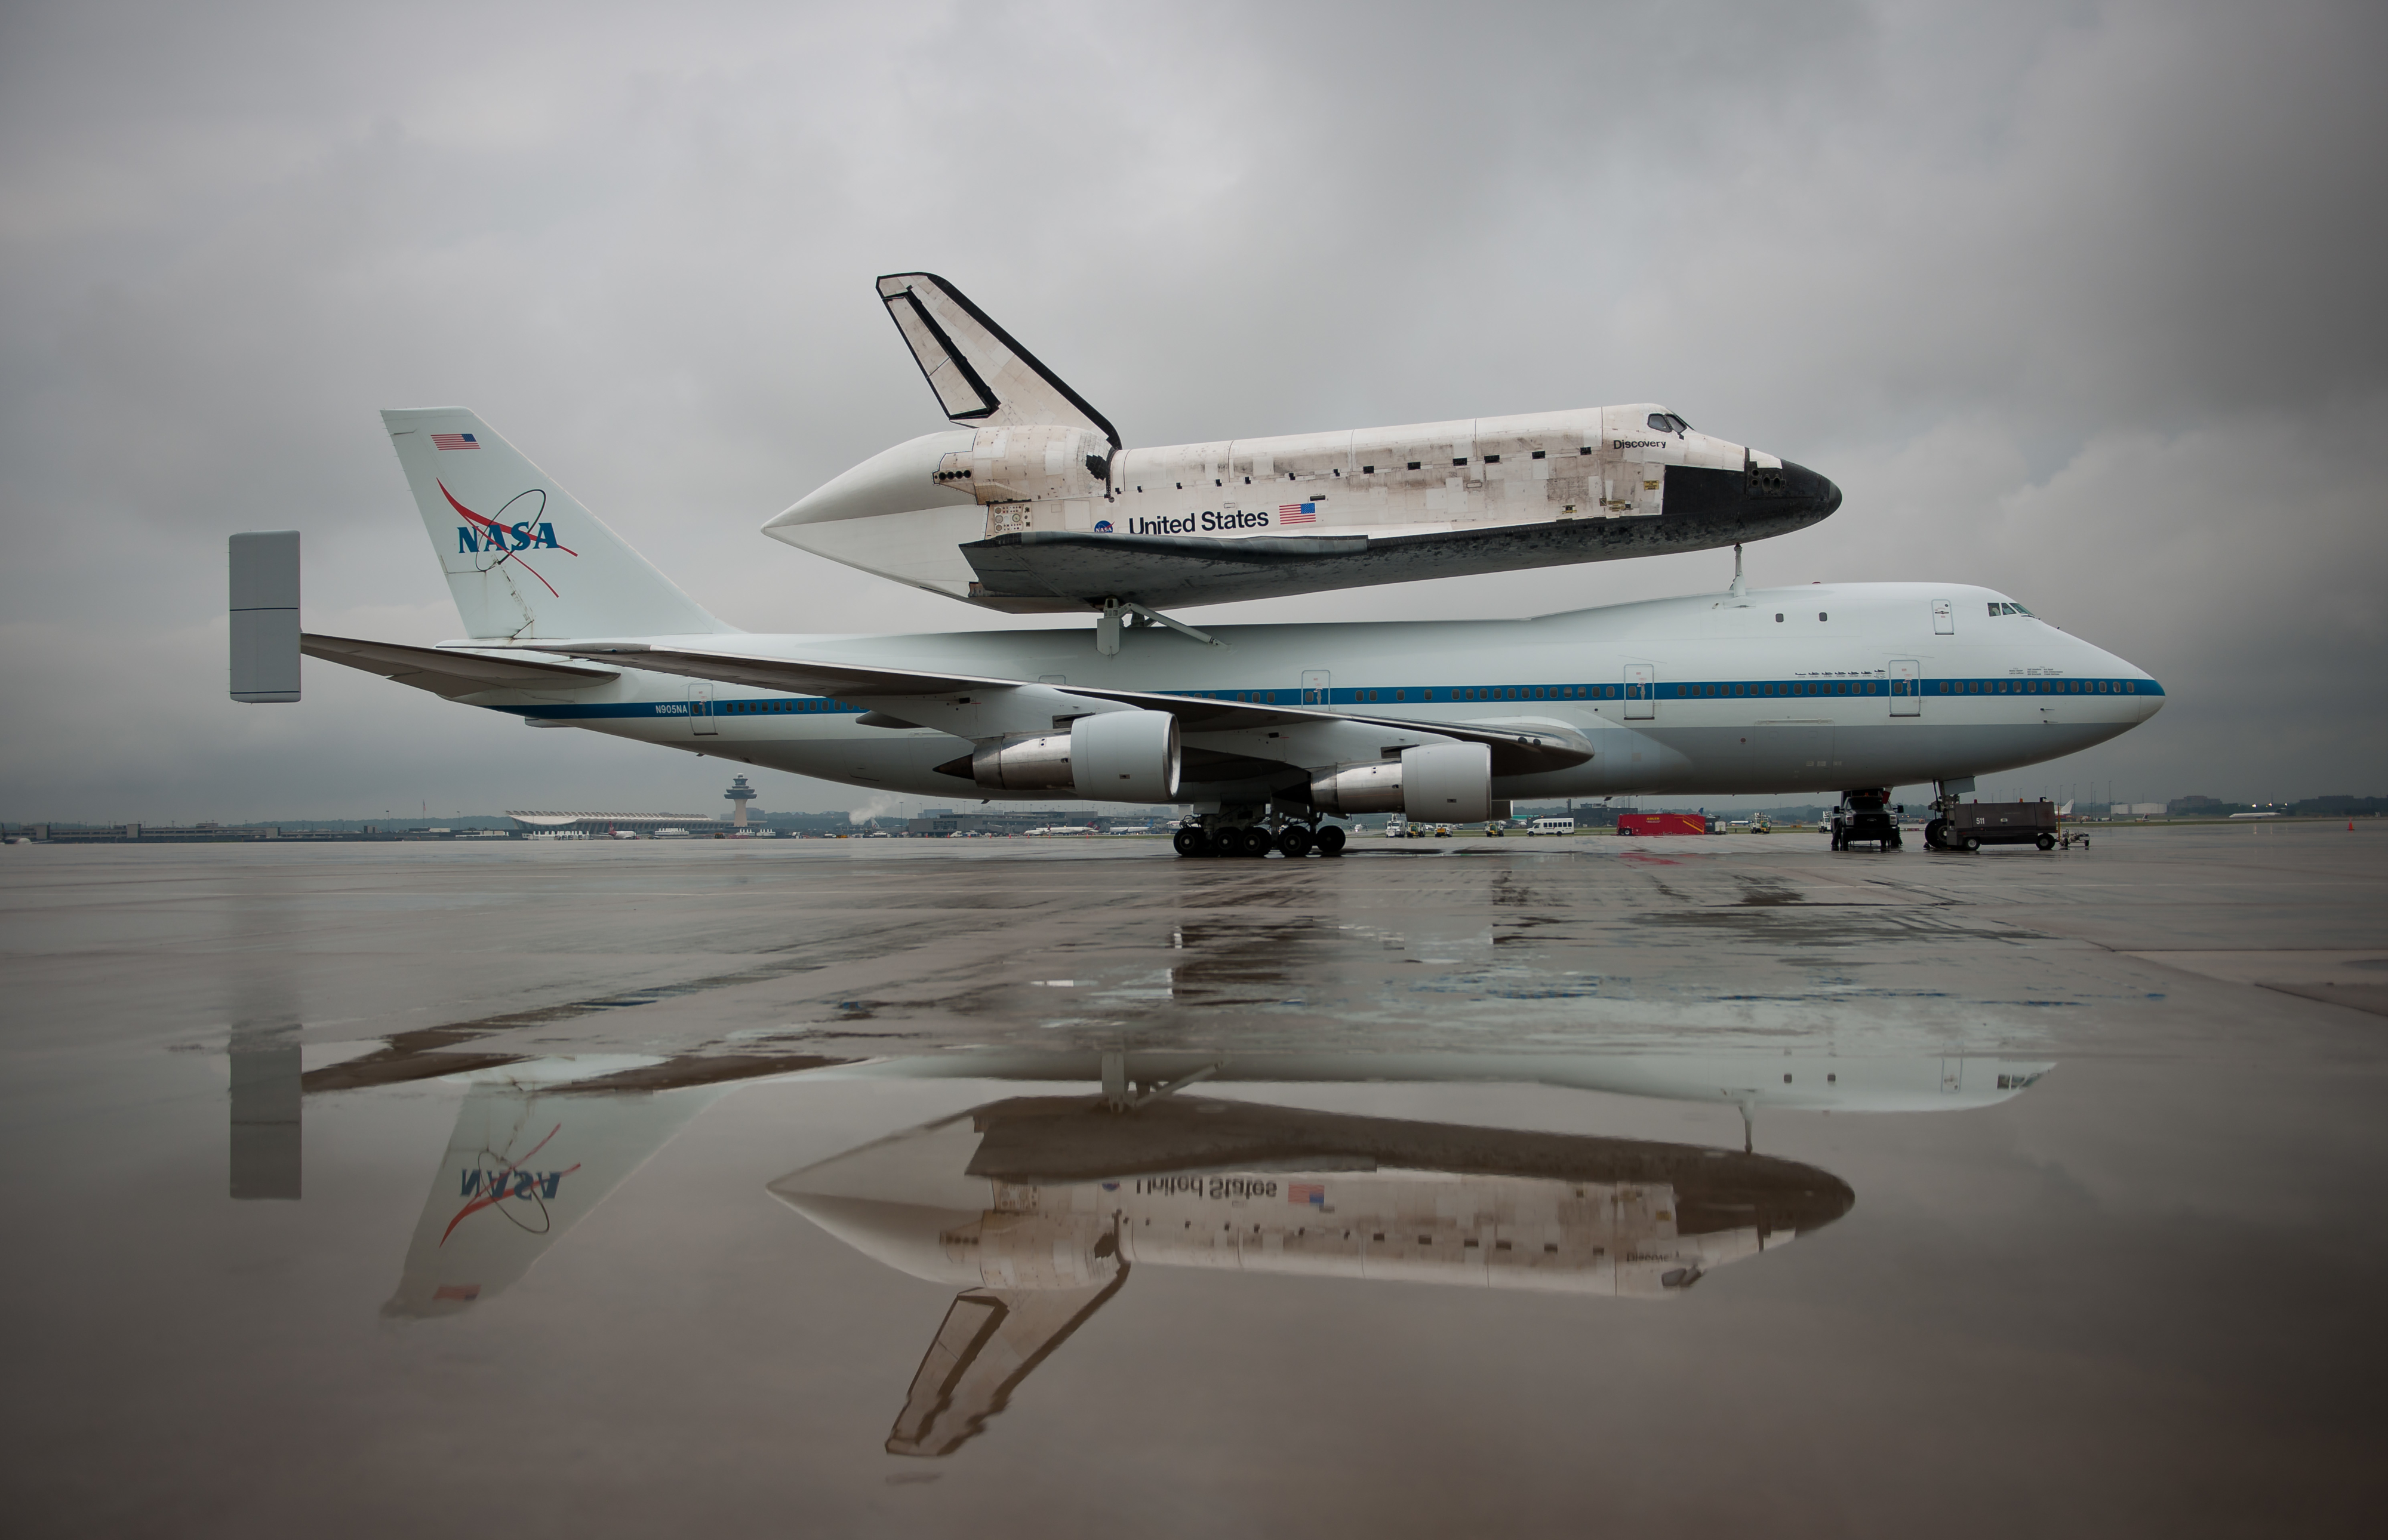 vehicles, space shuttle discovery, aircraft, reflection, space shuttles